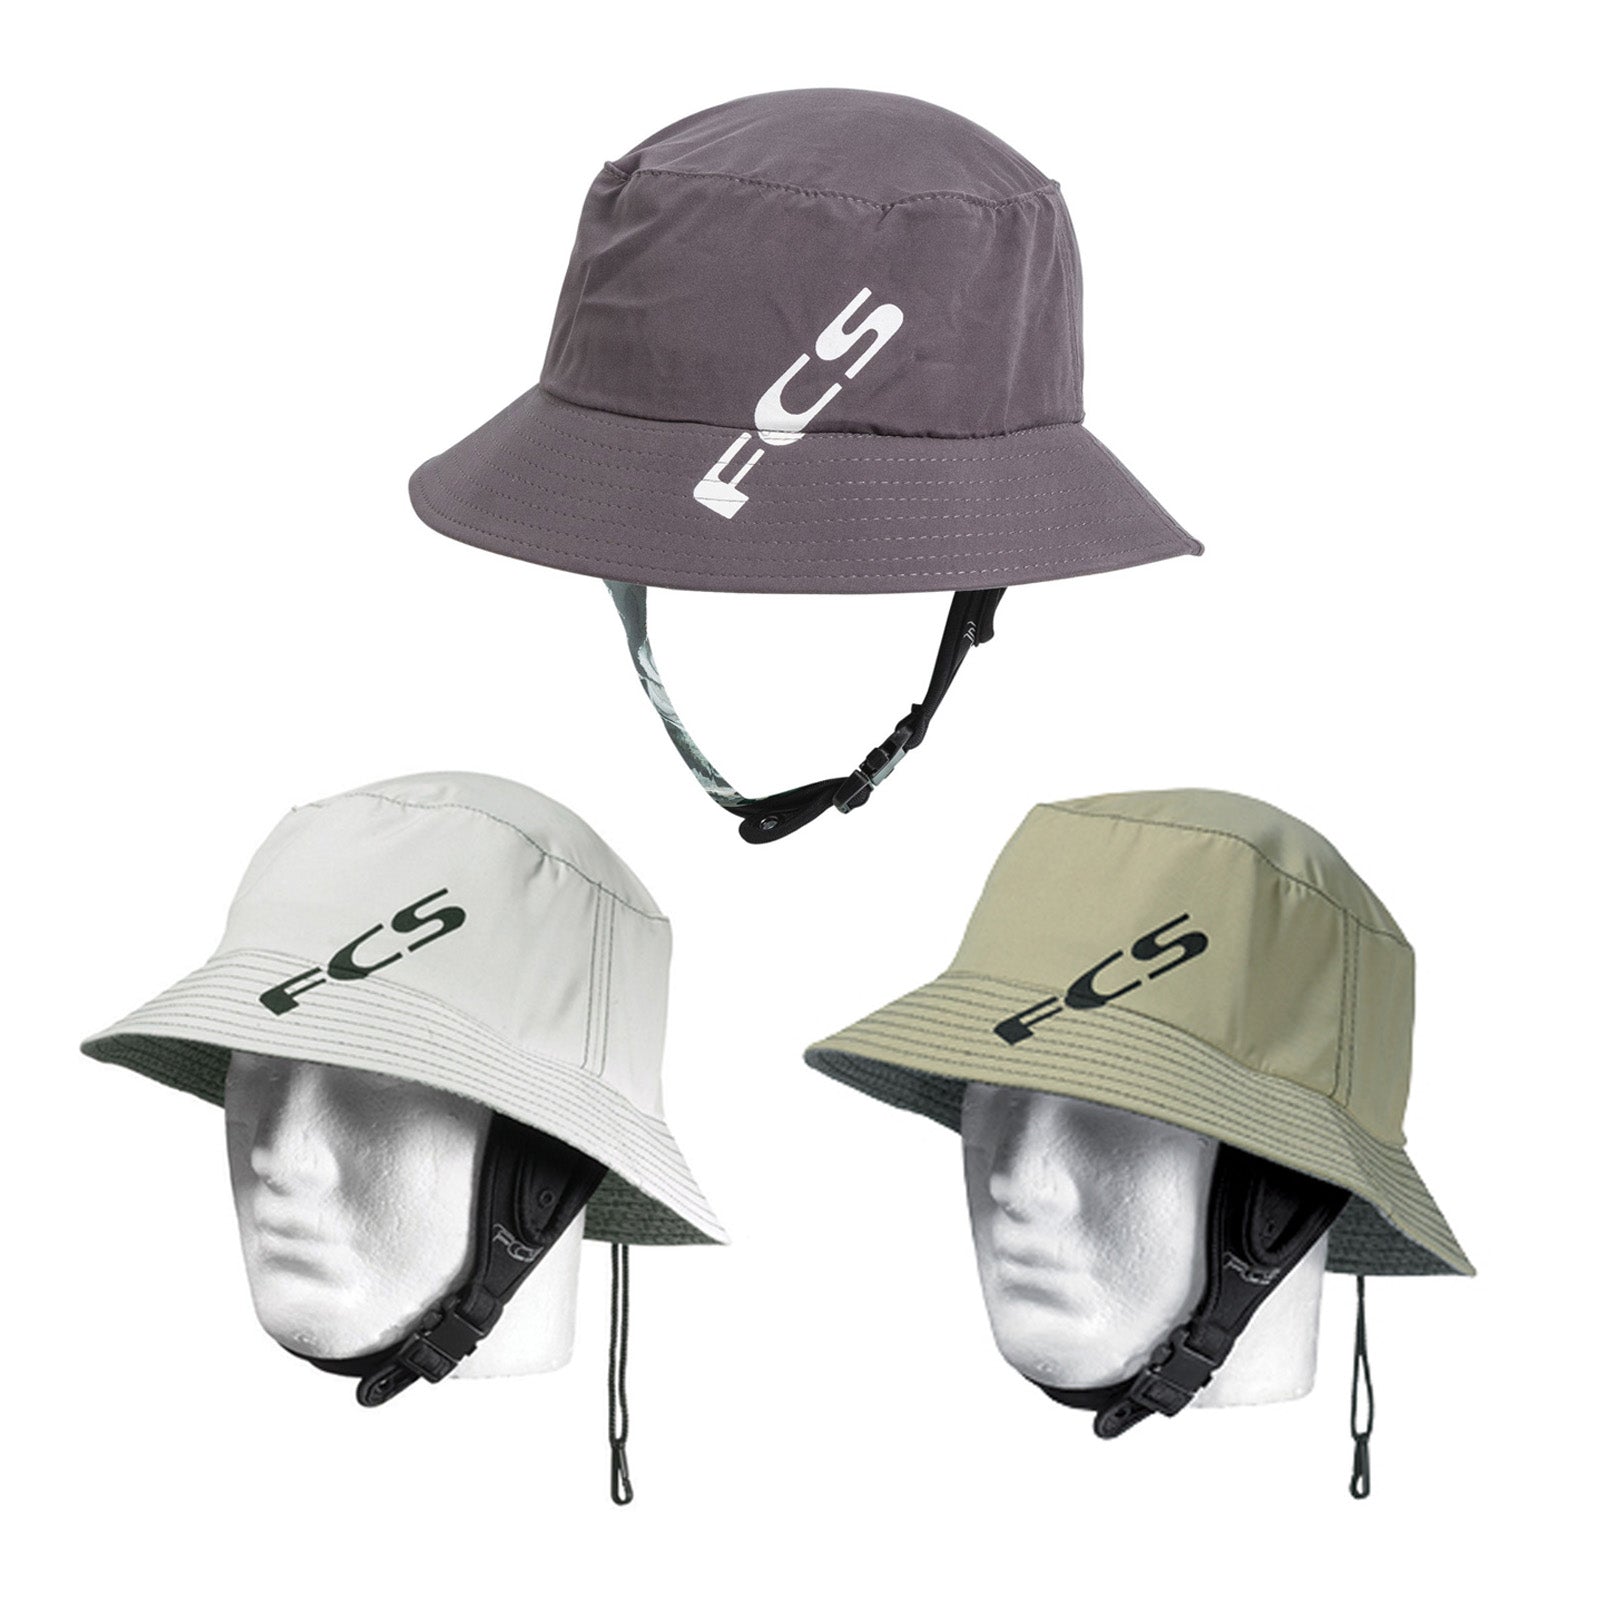 FCS Wet Bucket Hat for surfing, this beach hat is perfect